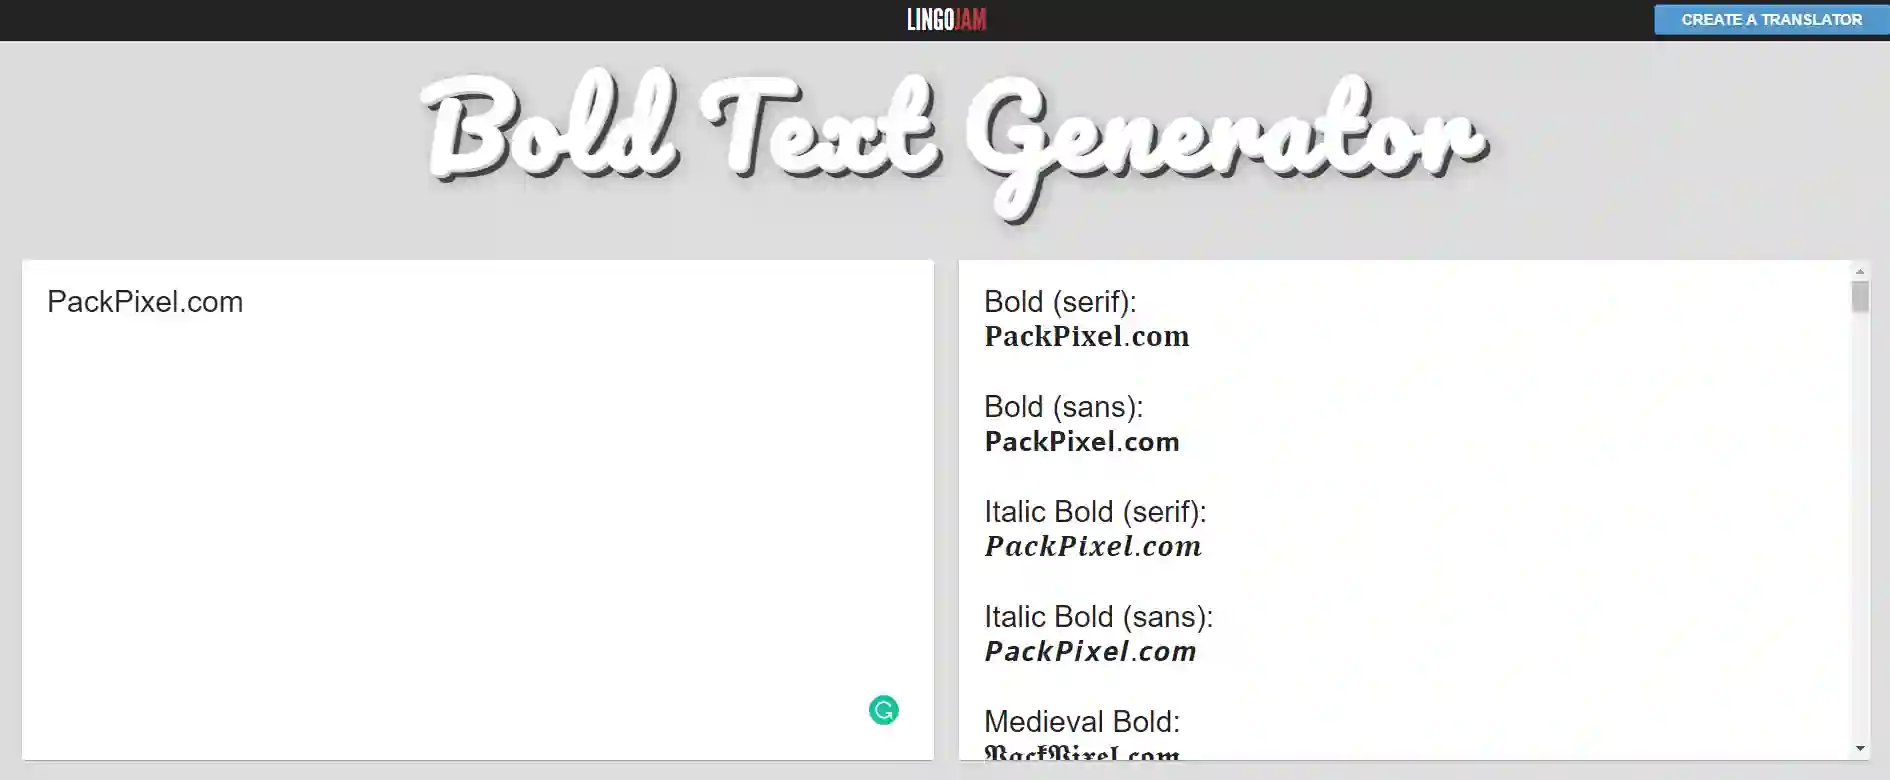 Instantly generate google form bold text with lingojam website